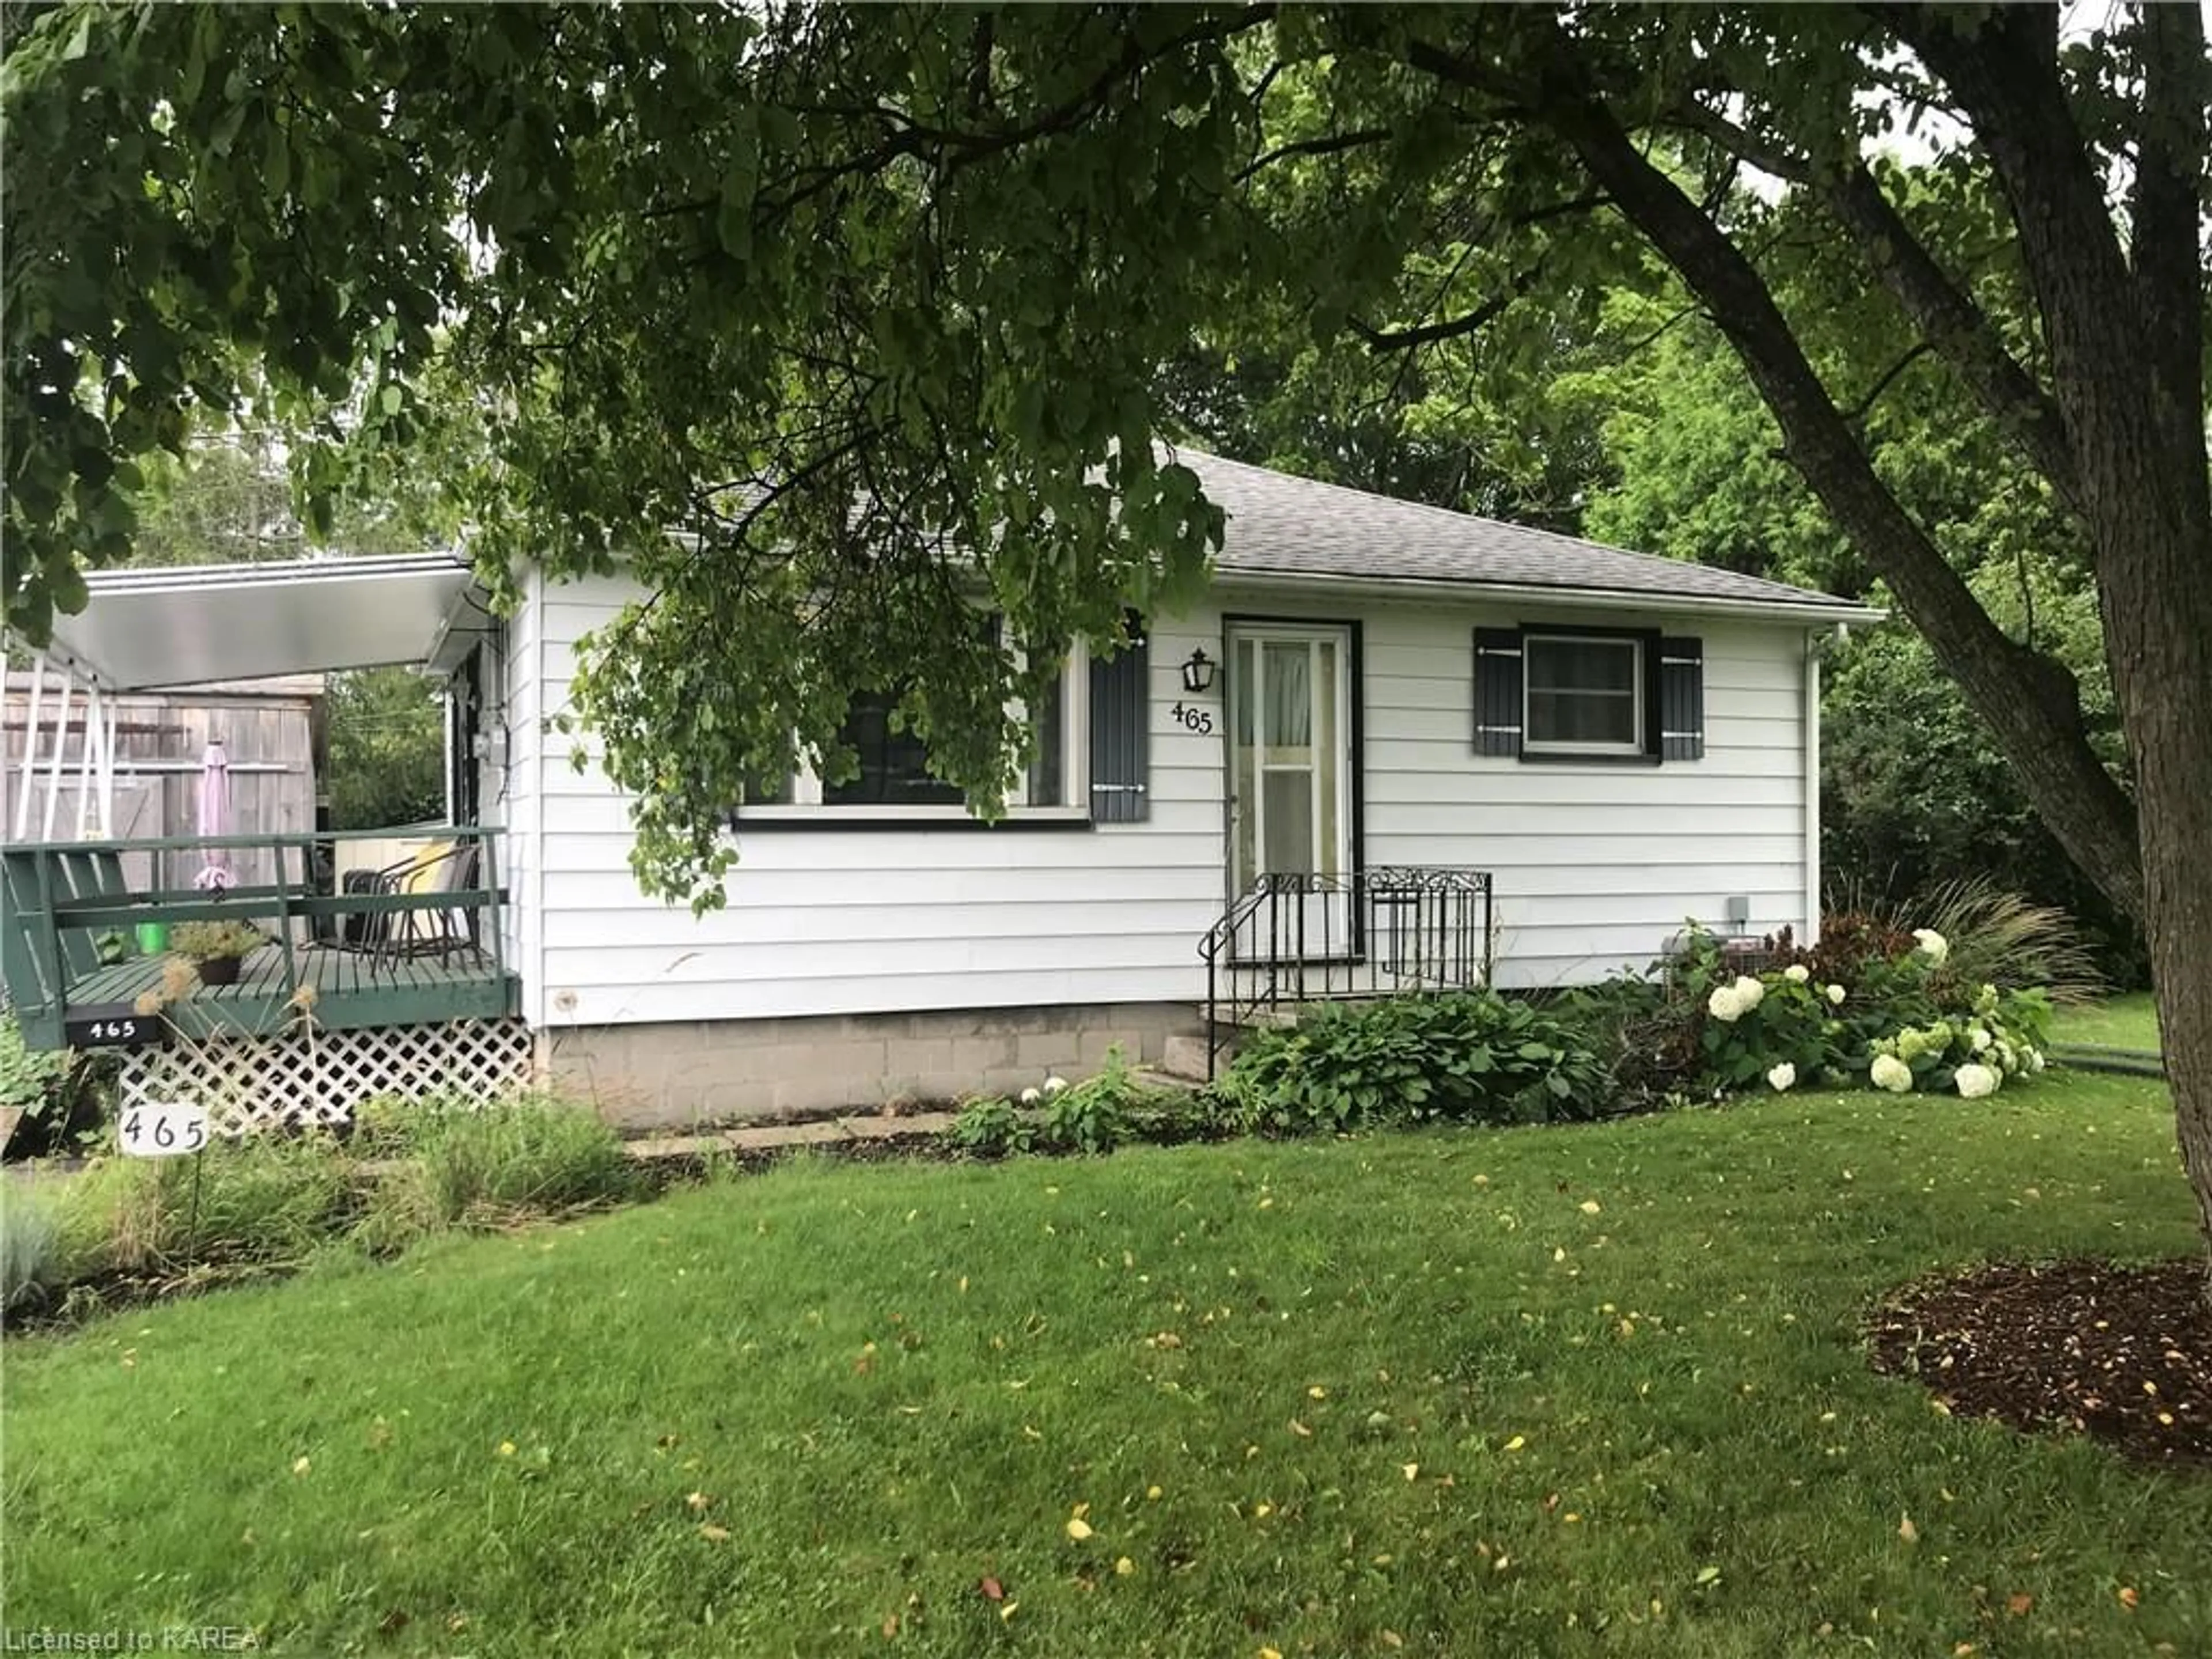 Frontside or backside of a home for 465 Dundas Street West, Napanee Ontario K7R 2B9